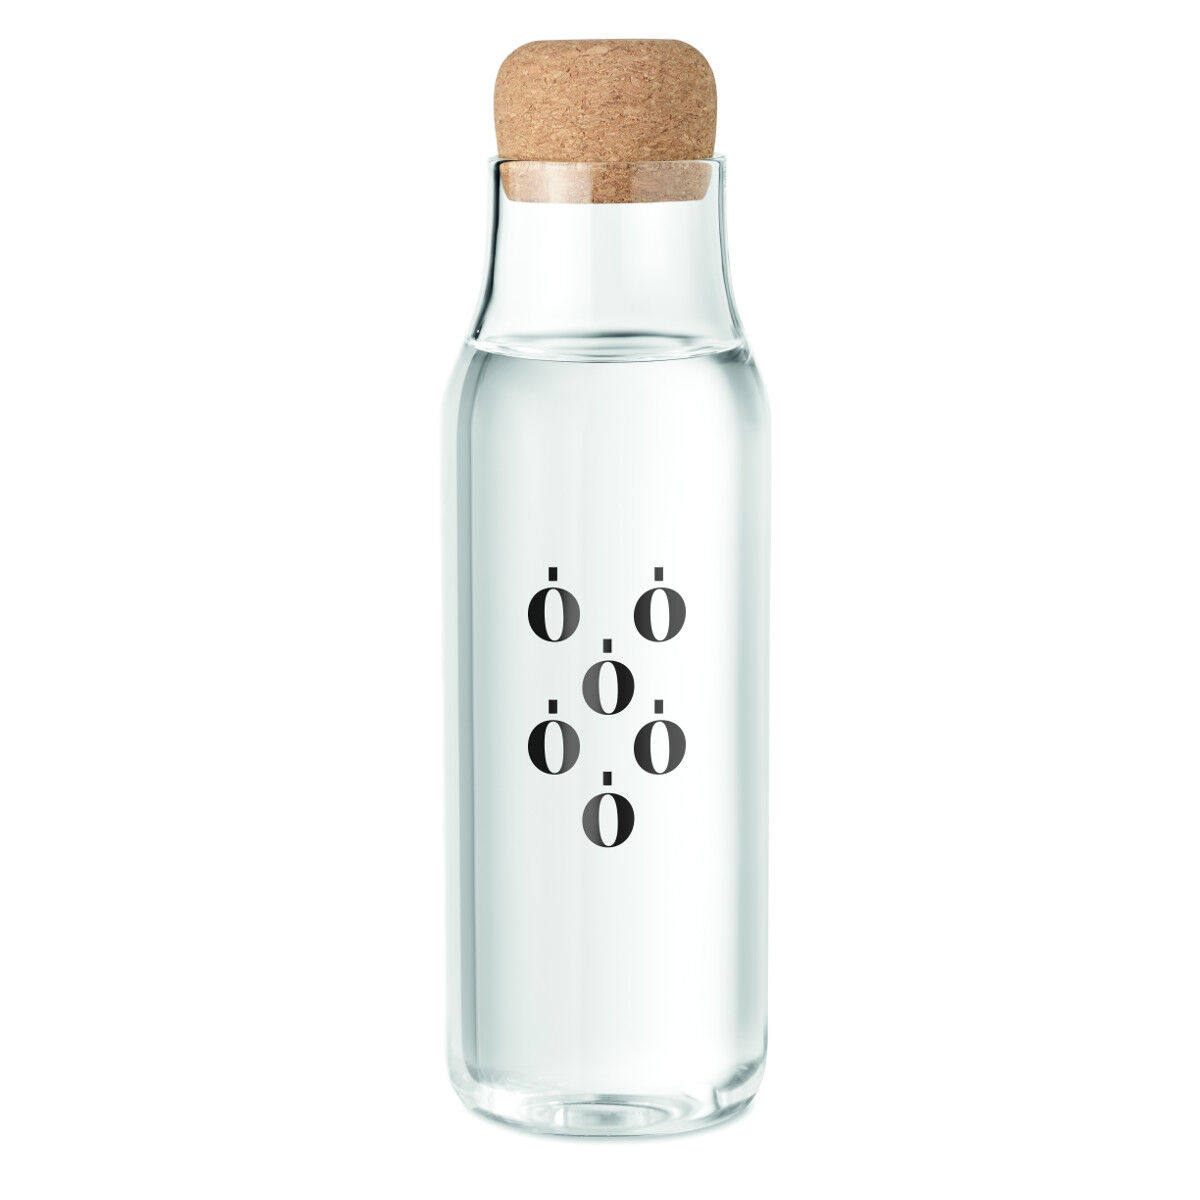  Glass Decanter water bottle with a cork lid (sample branding)